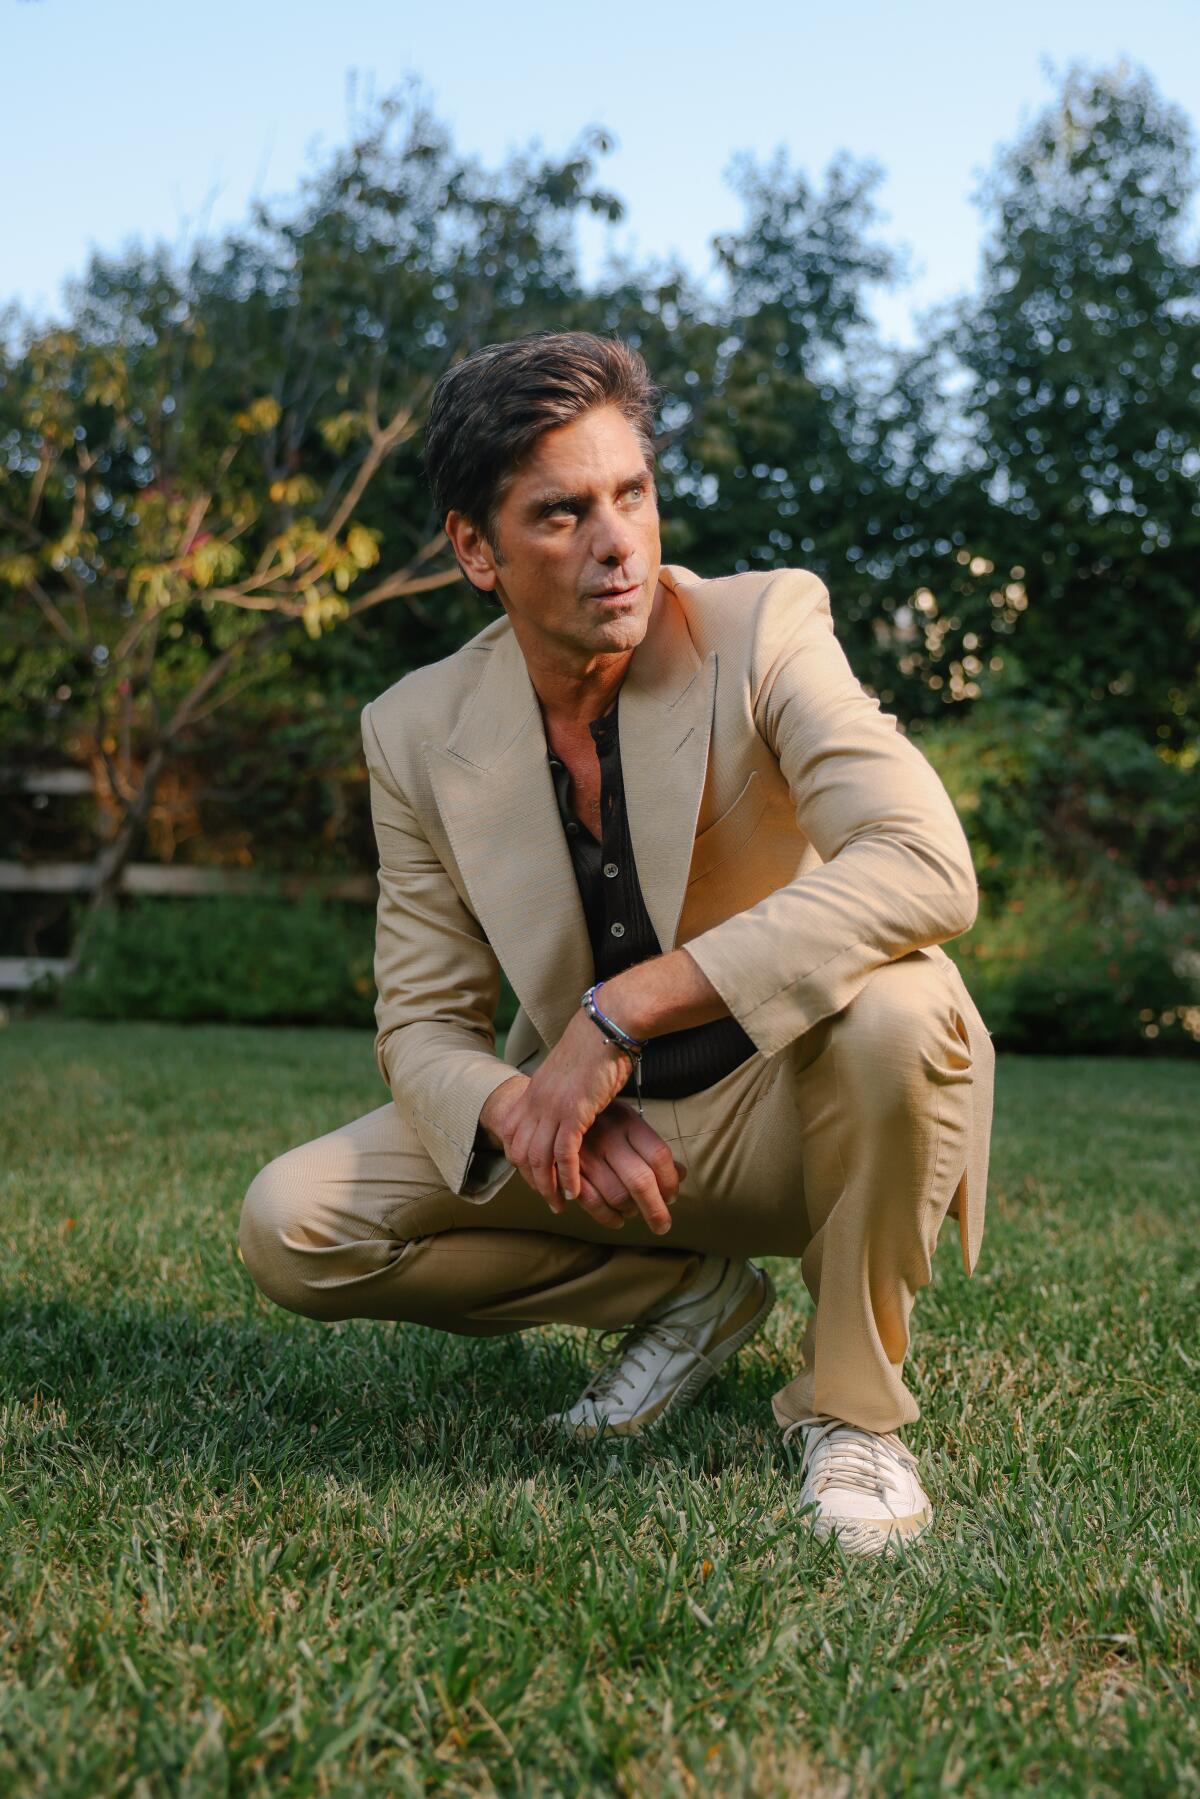 John Stamos, in a tan suit and white sneakers, squats in a green yard with tree in the background.